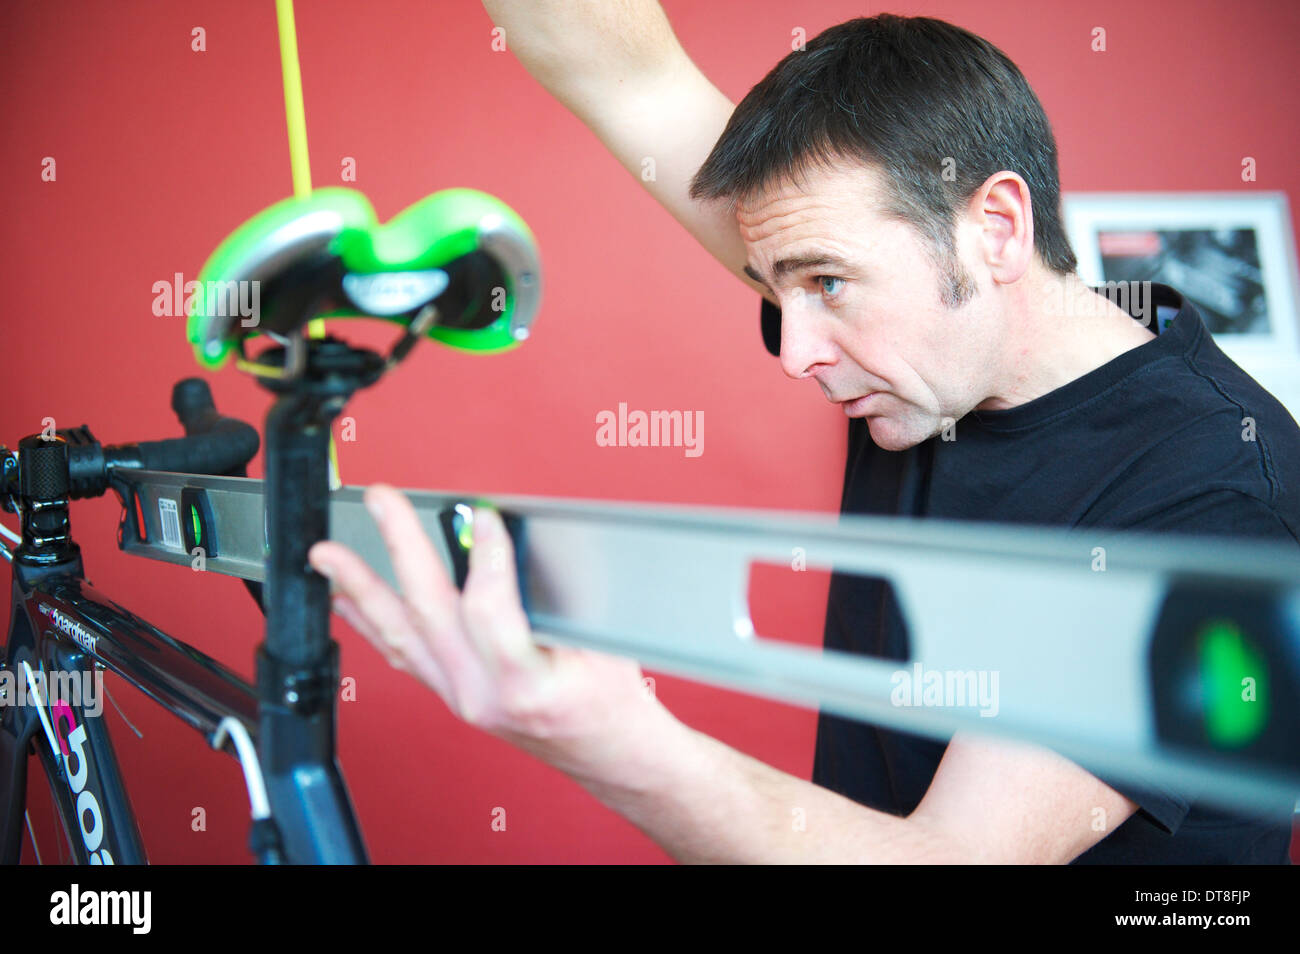 Professional Bike fit services in UK cycle shop Stock Photo